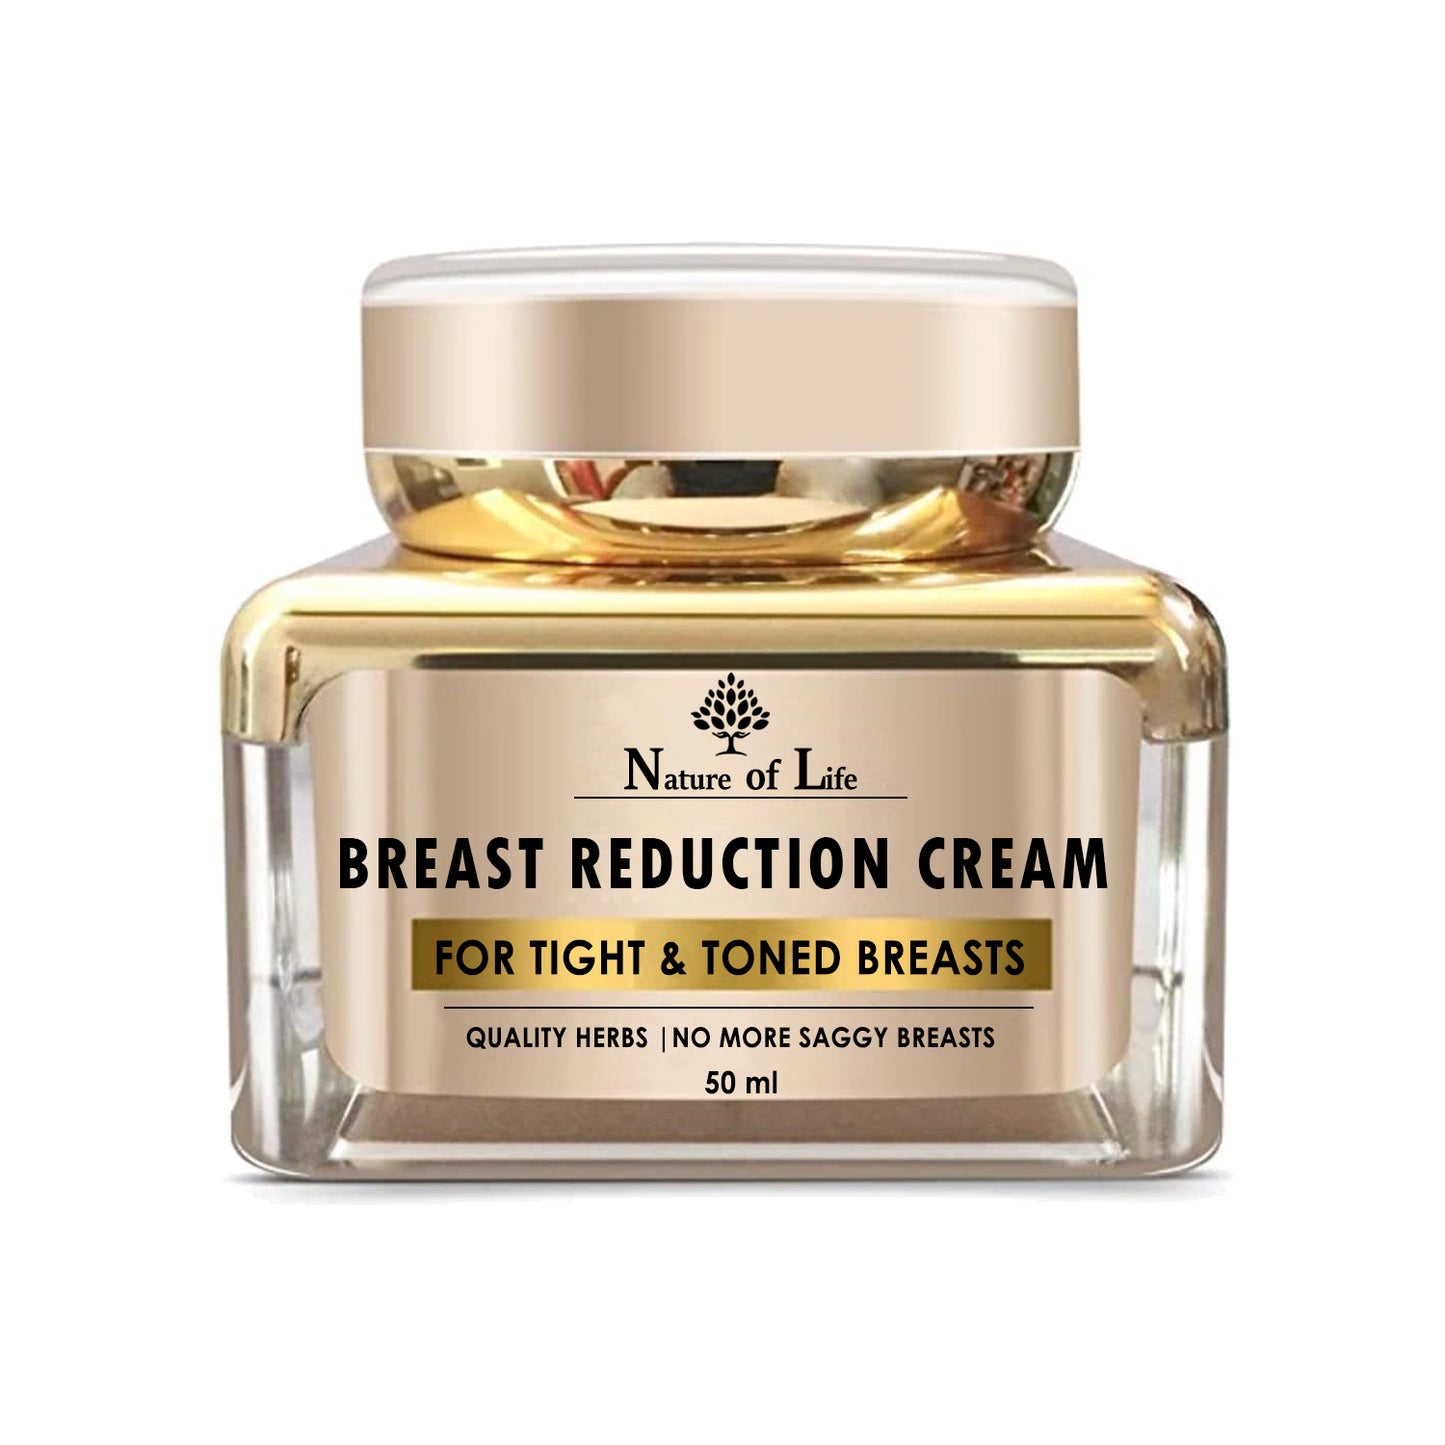 Which is Better- Breast Reduction Cream or Breast Reduction